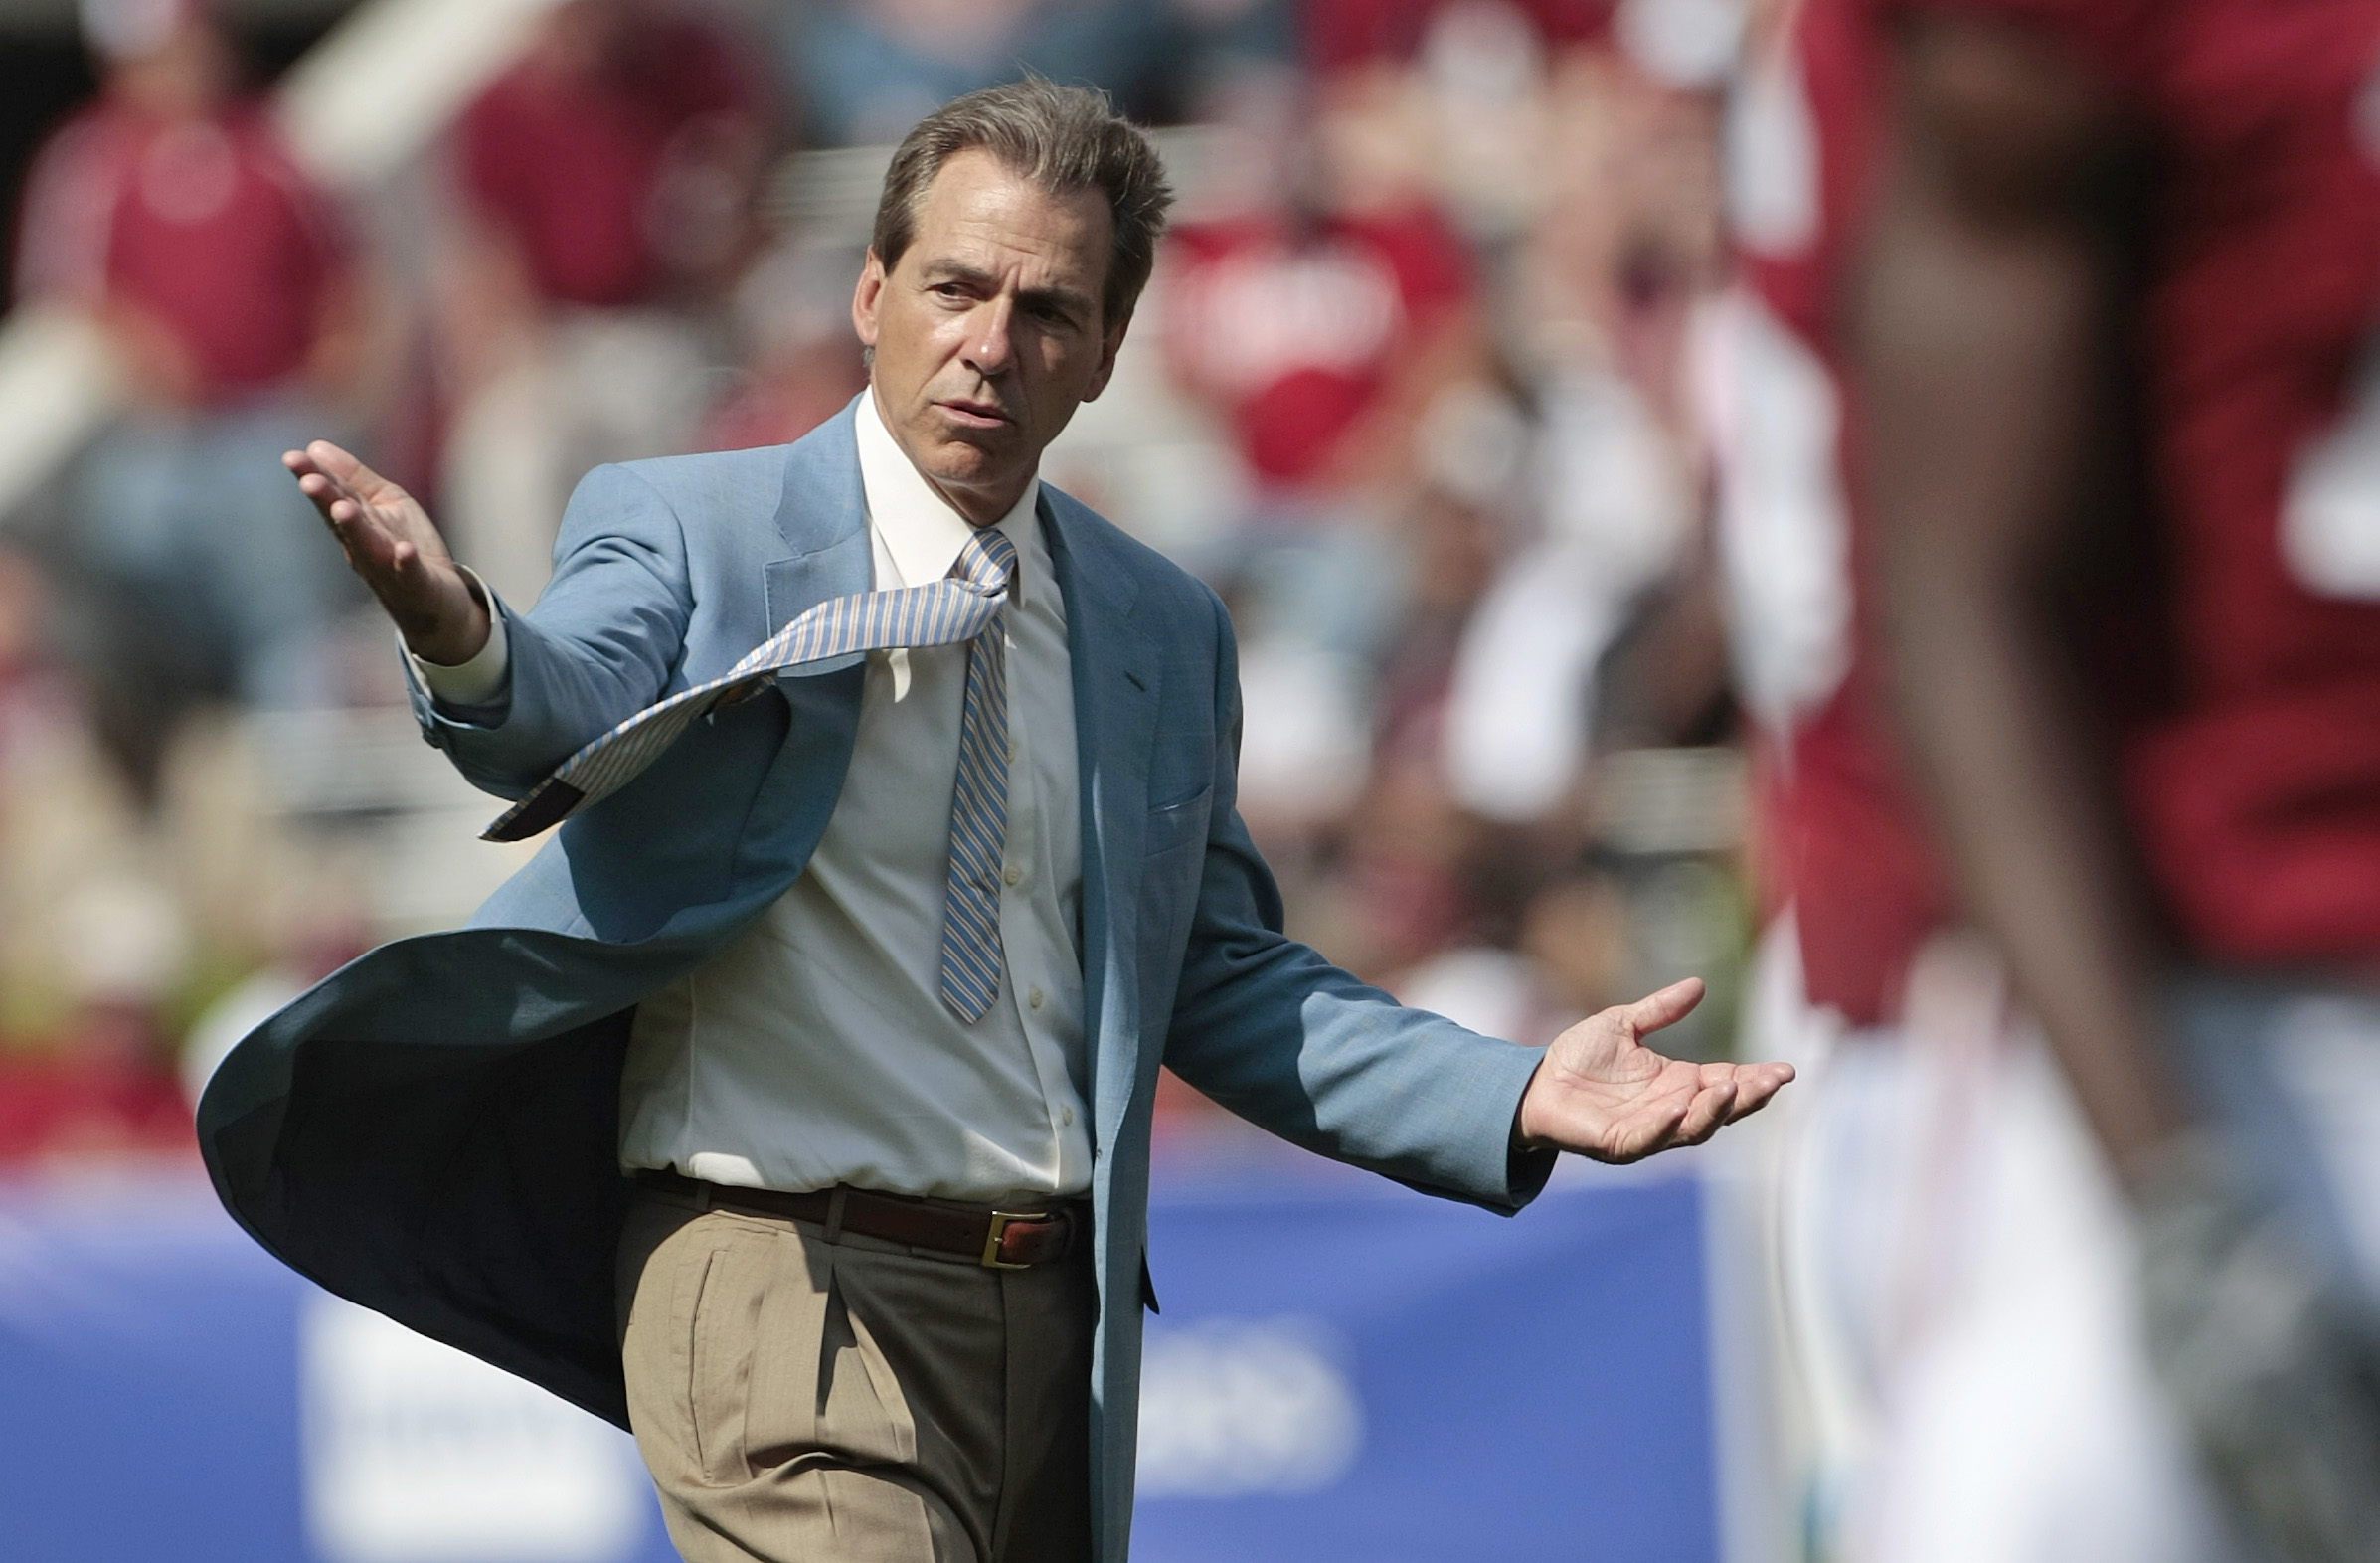 TUSCALOOSA, AL - APRIL 17: Coach Nick Saban of the Alabama Crimson Tide reacts during the Alabama spring game at Bryant Denny Stadium on April 17, 2010 in Tuscaloosa, Alabama. (Photo by Dave Martin/Getty Images)